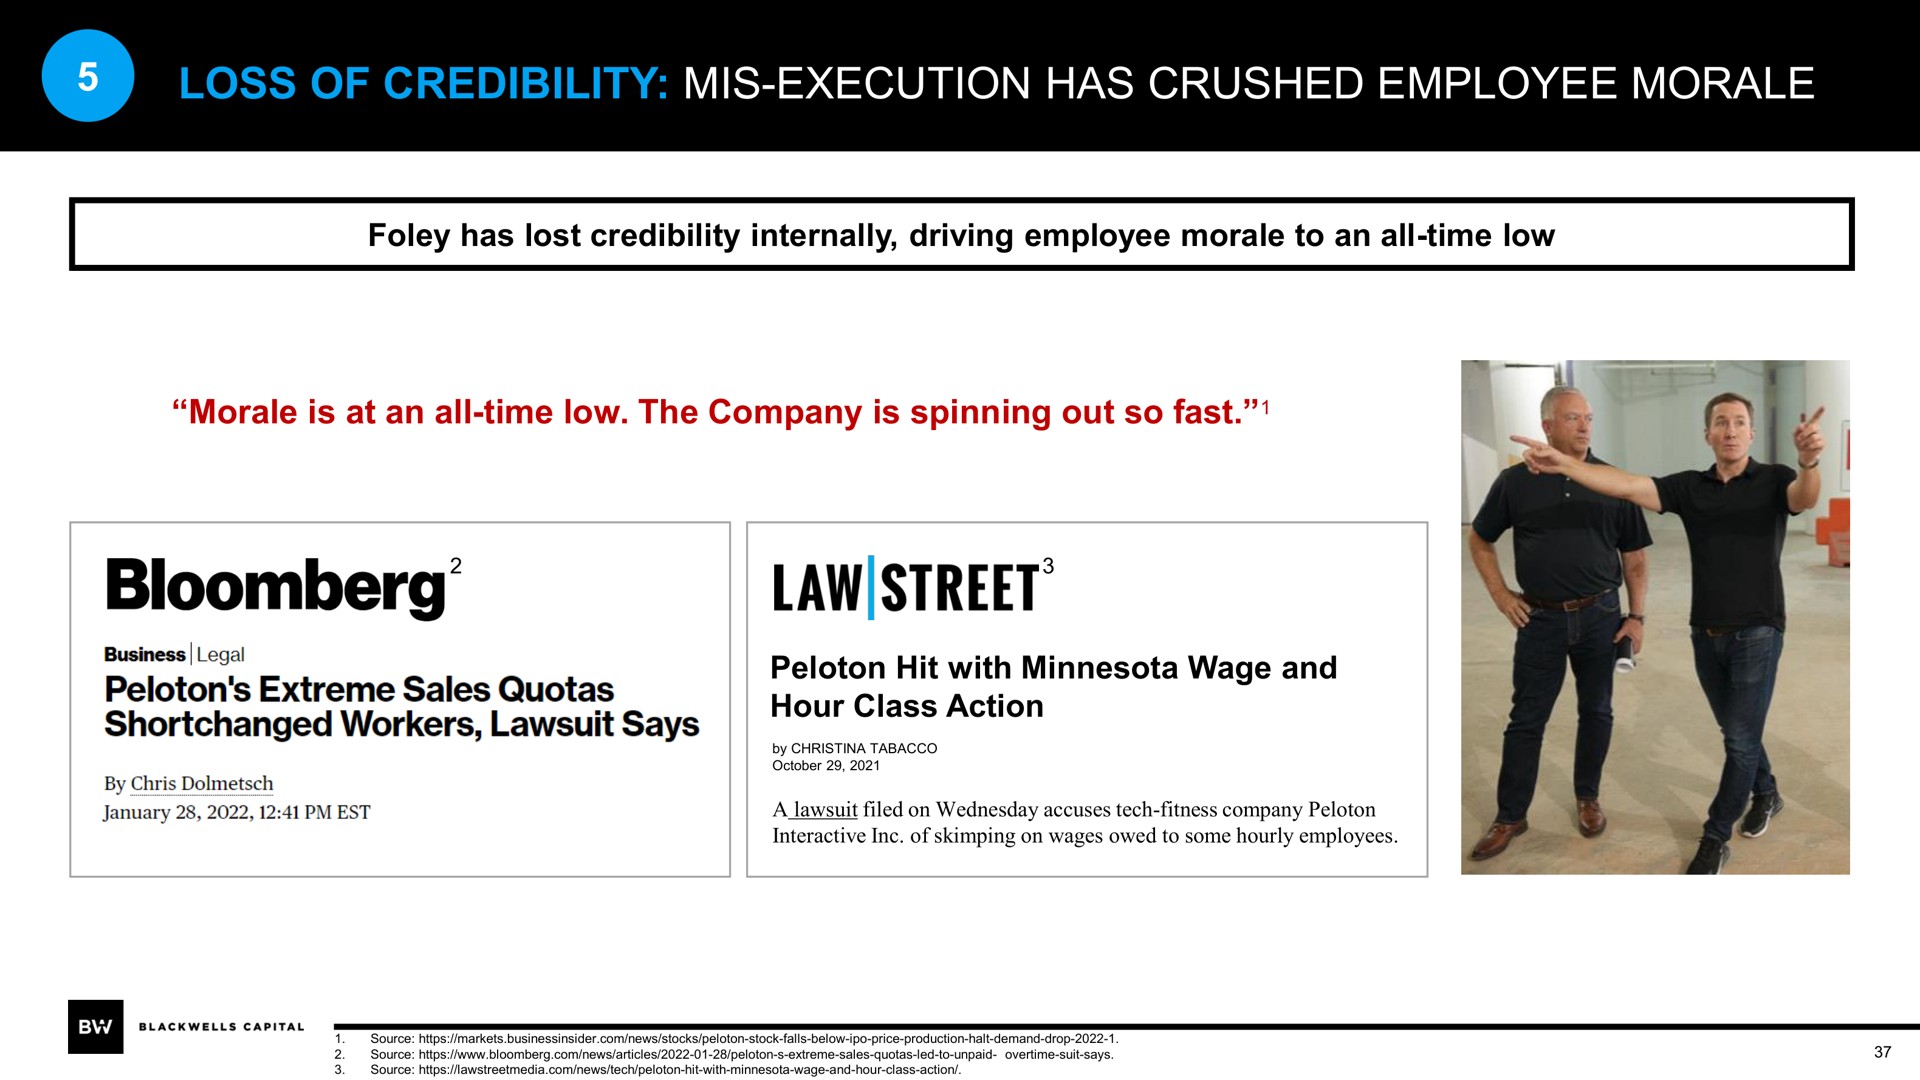 loss of credibility mis execution has crushed employee morale law street workers | Blackwells Capital